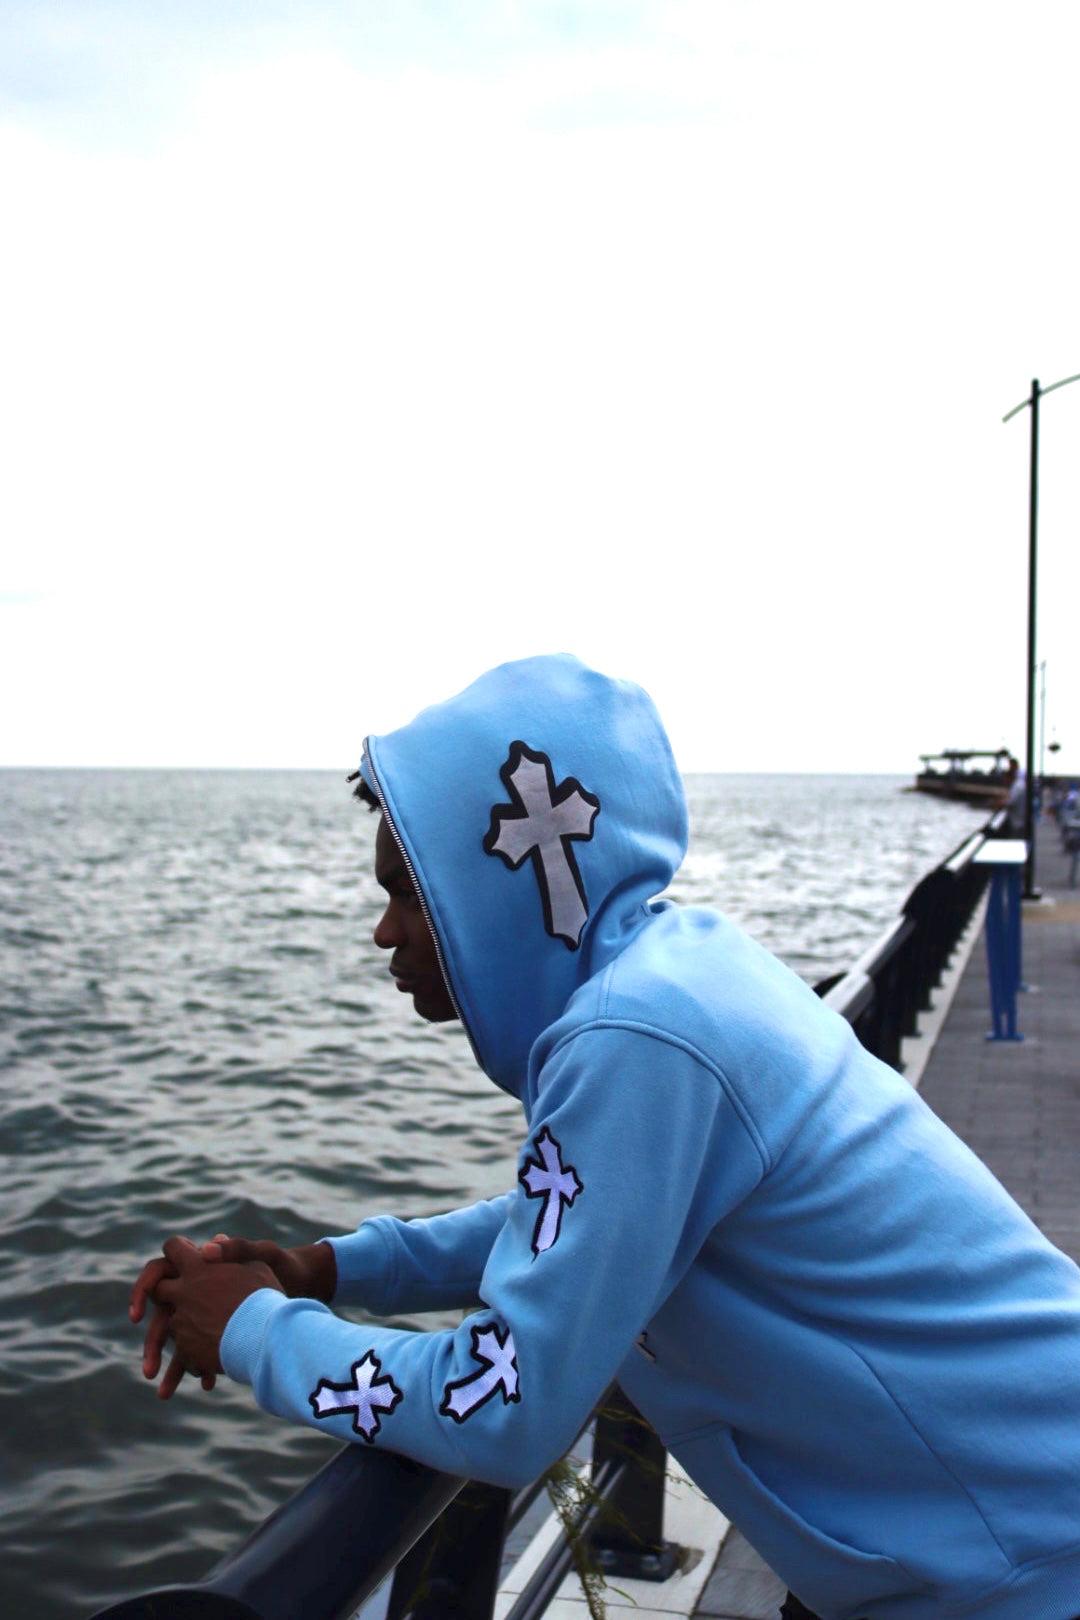 "BABY BLUE" HUMBLE YOURSELF FULL ZIP